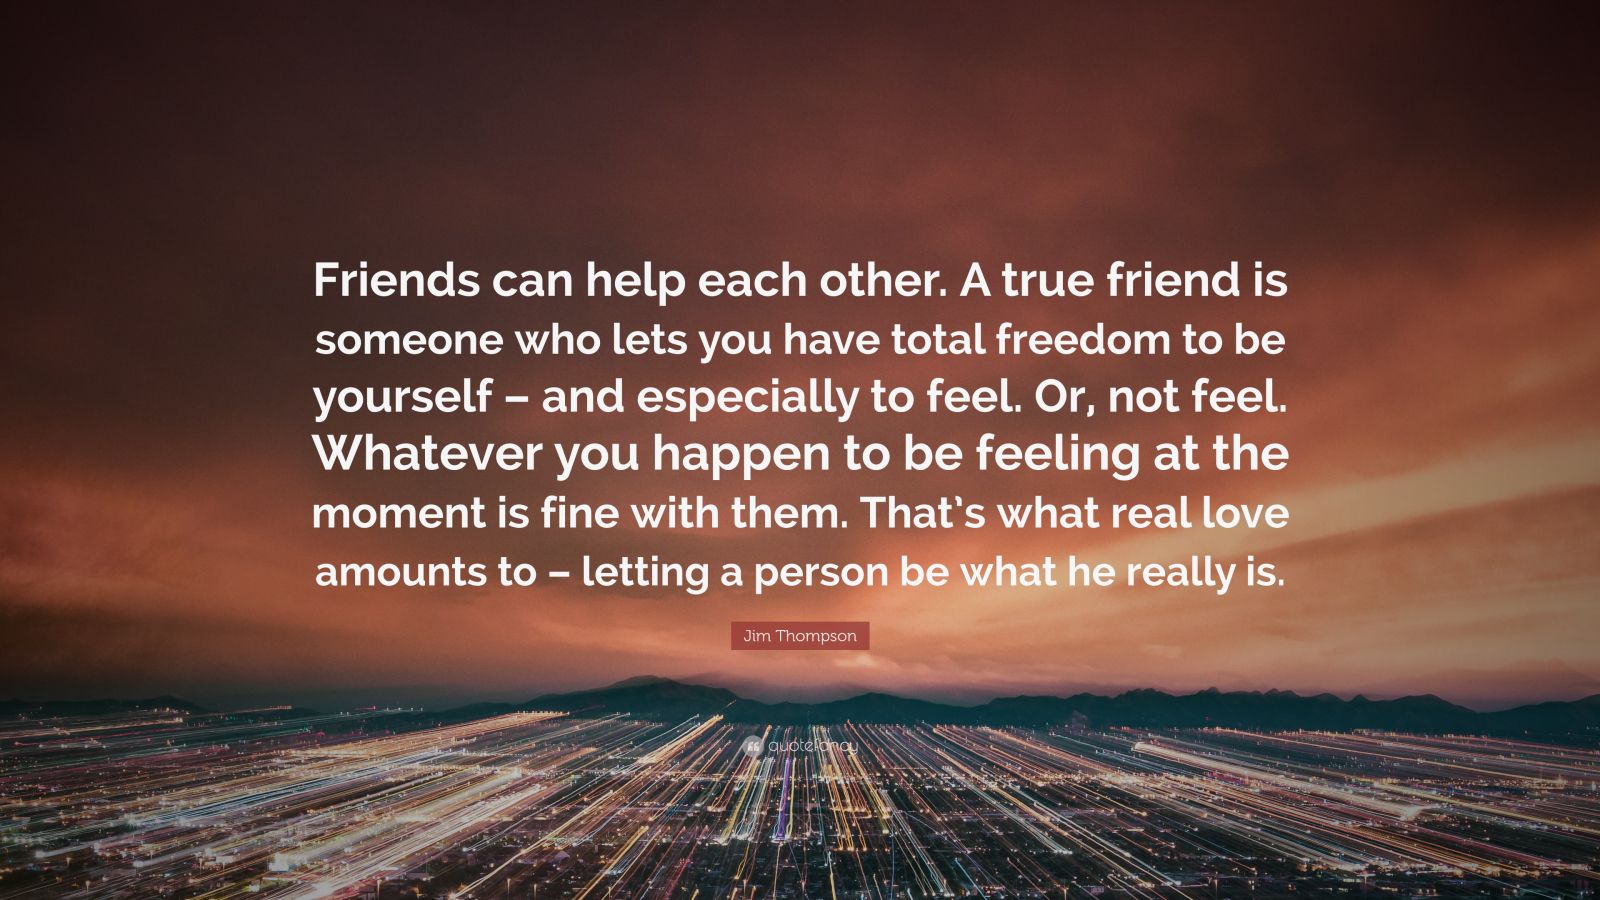 Jim Thompson Quote: “Friends can help each other. A true friend is ...